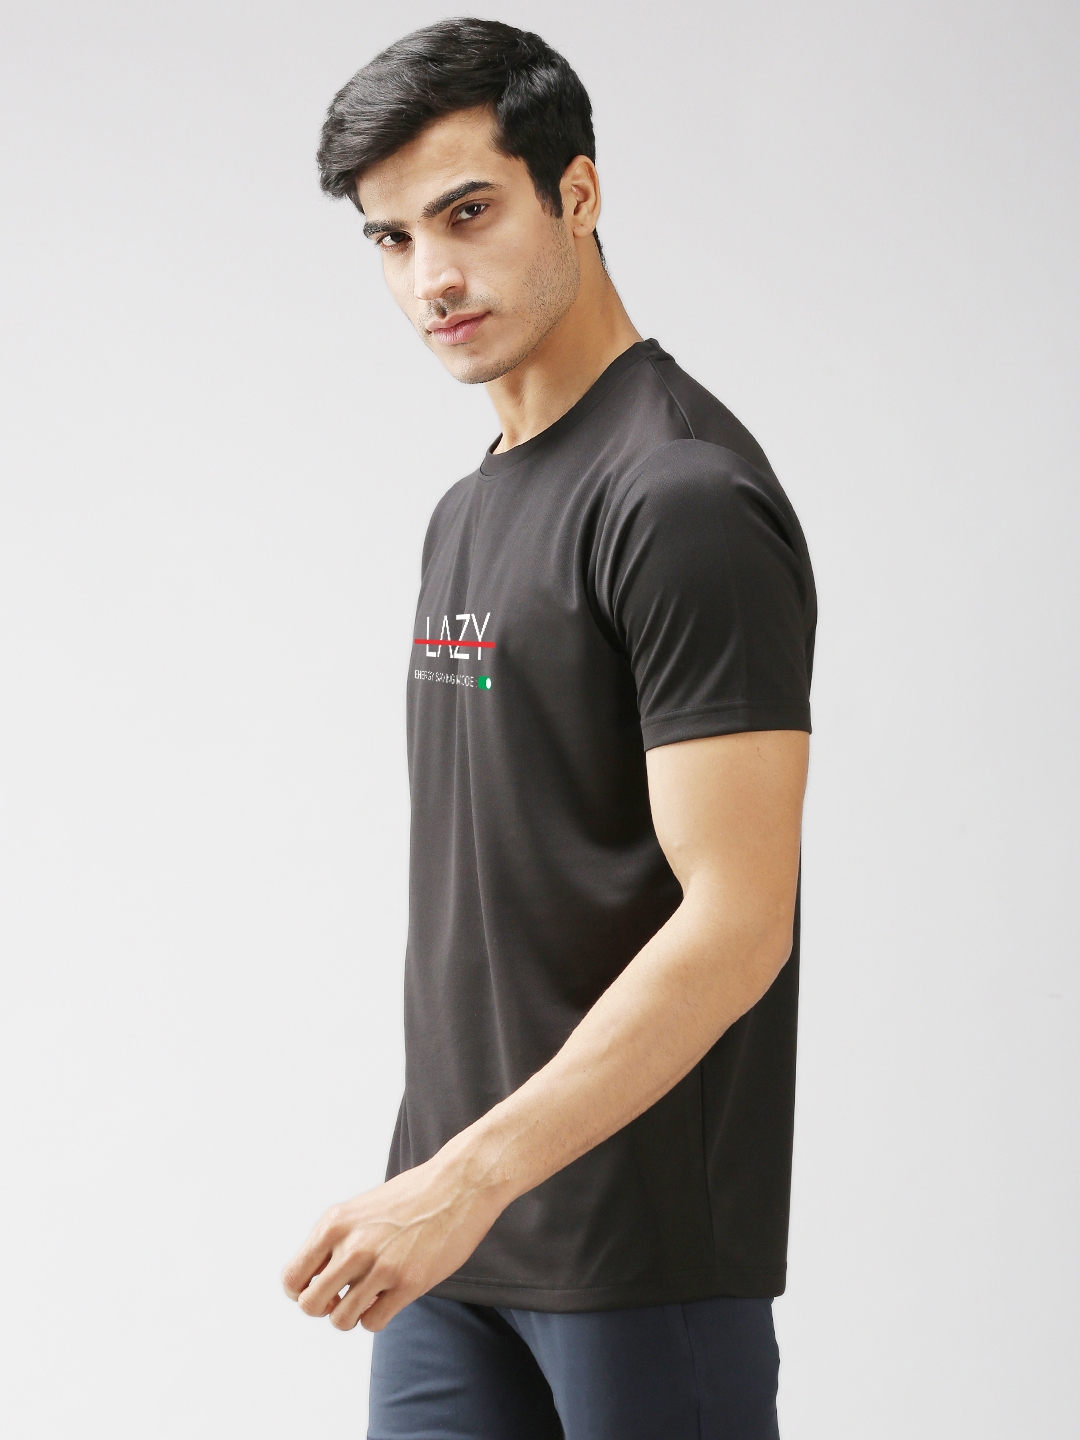 EPPE Dryfit Micropolyester Tshirt for Men's Round Neck Half Sleeves Sports Casual - Black - Size-S(36)